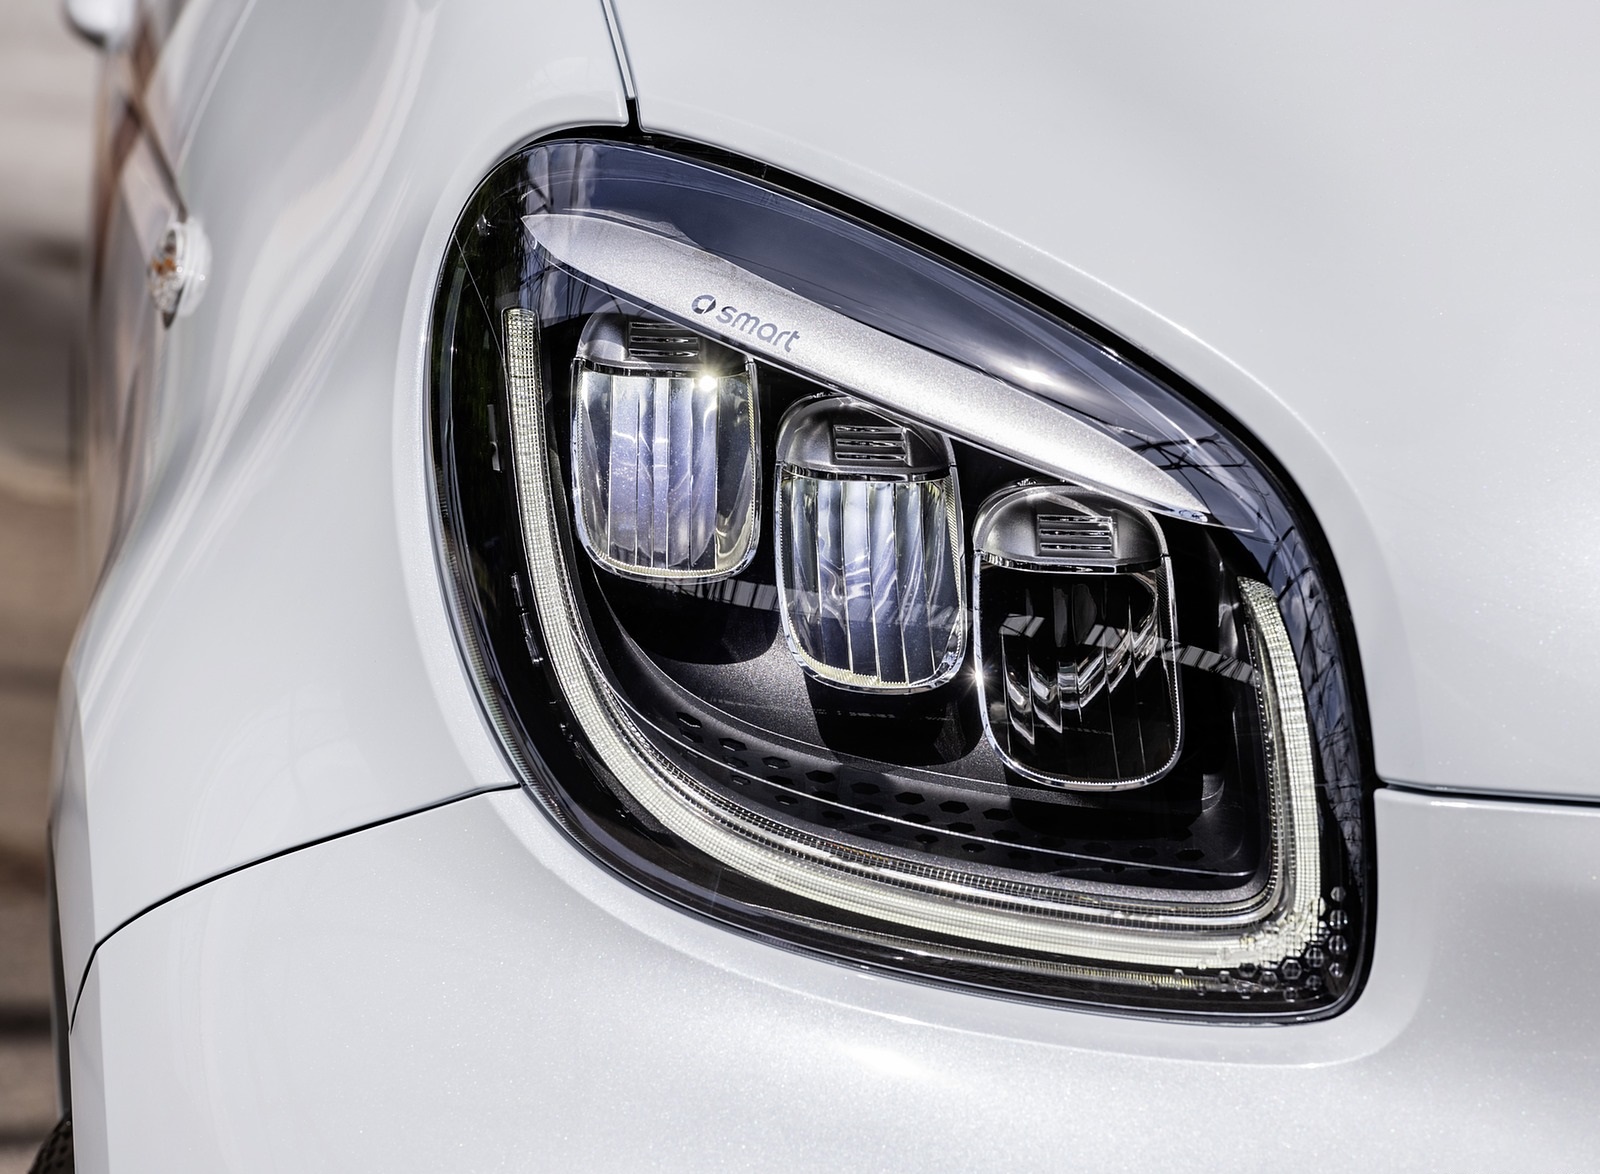 2020 Smart EQ ForFour Headlight Wallpapers #37 of 80